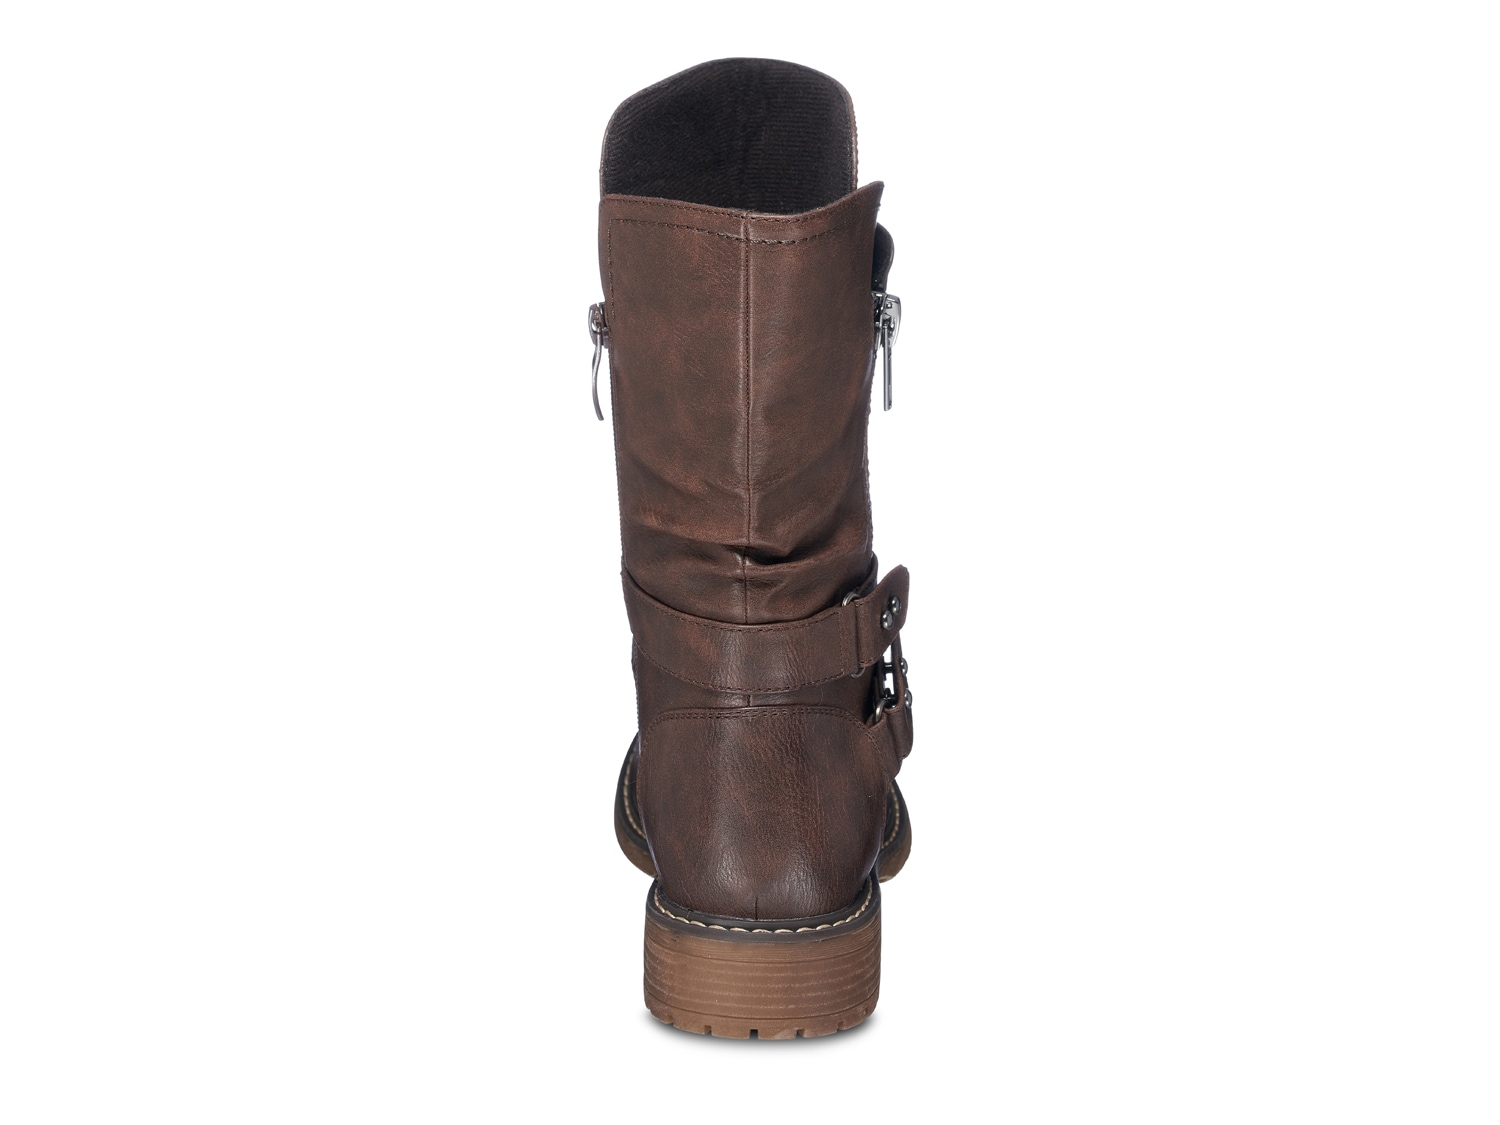 GC Shoes Brandy Riding Boot | DSW